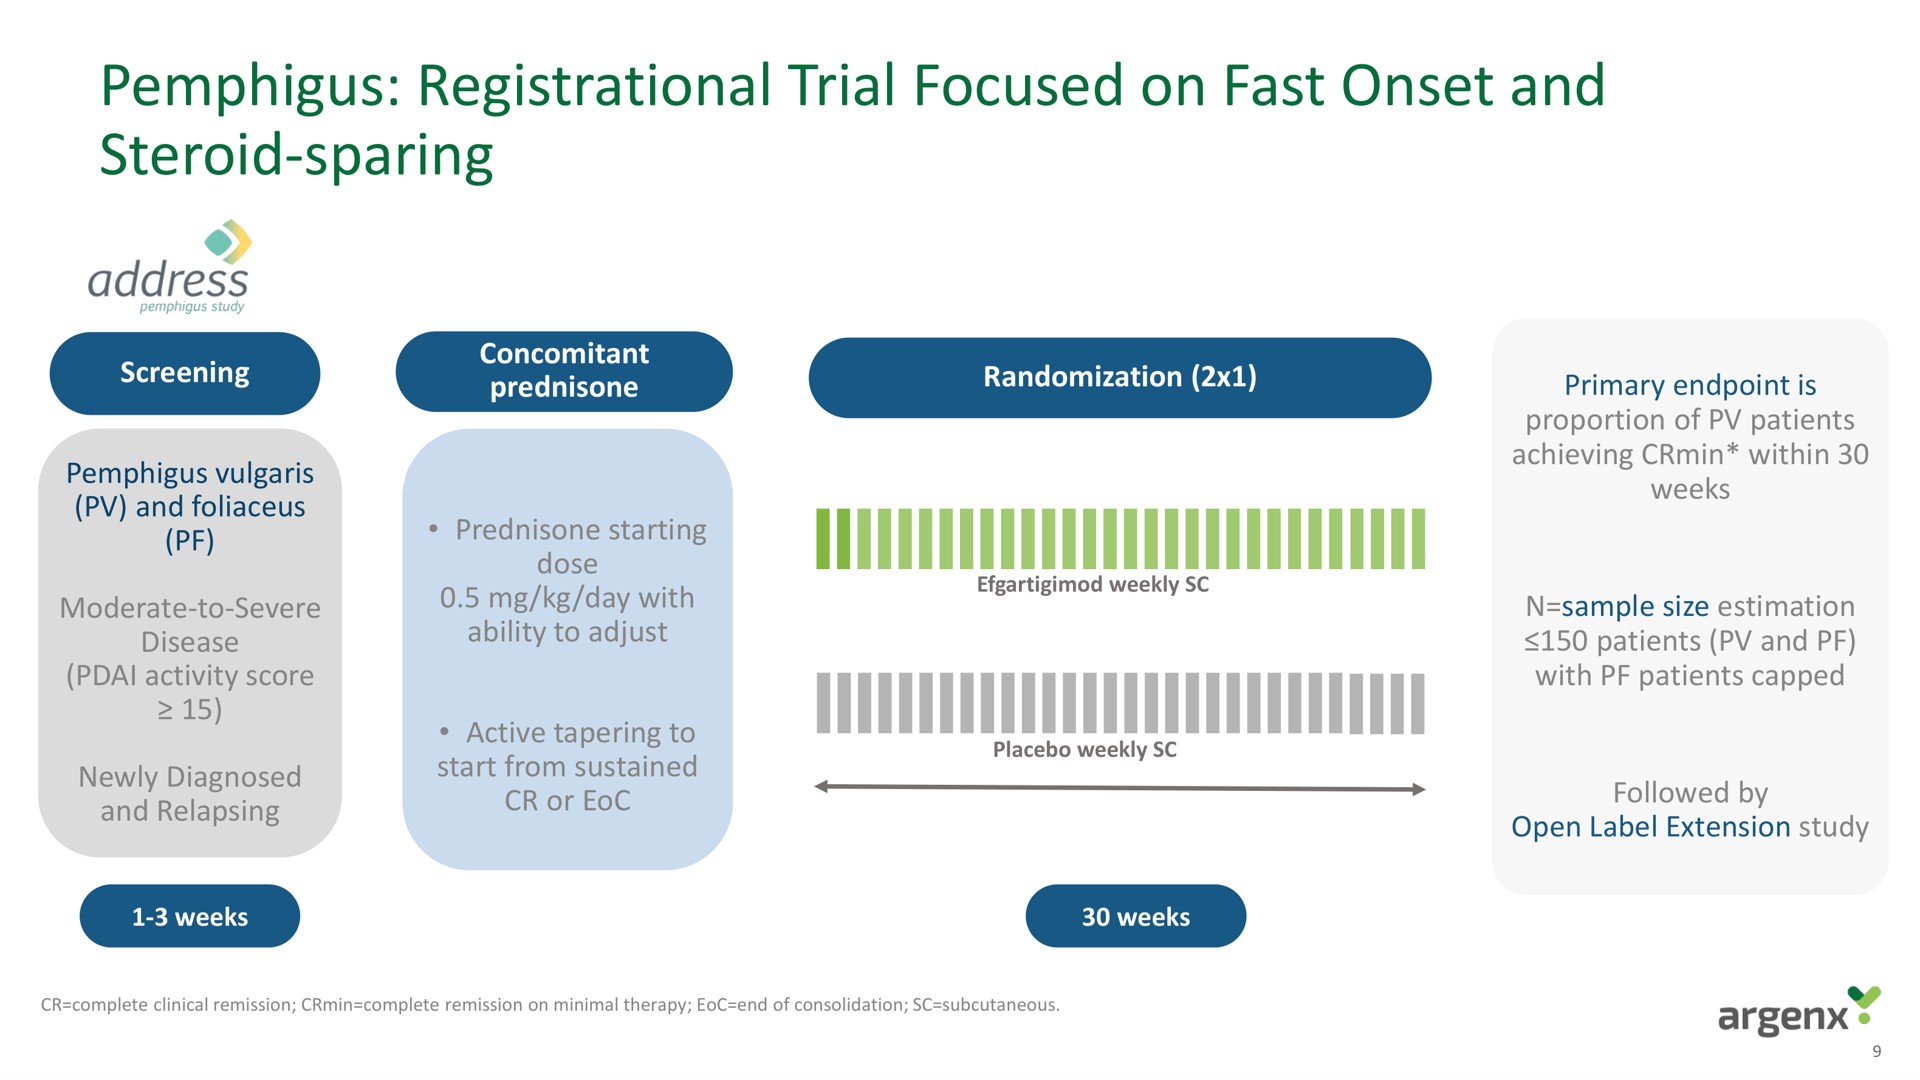 pemphigus registrational trial focused on fast onset and steroid sparing address | argenx SE